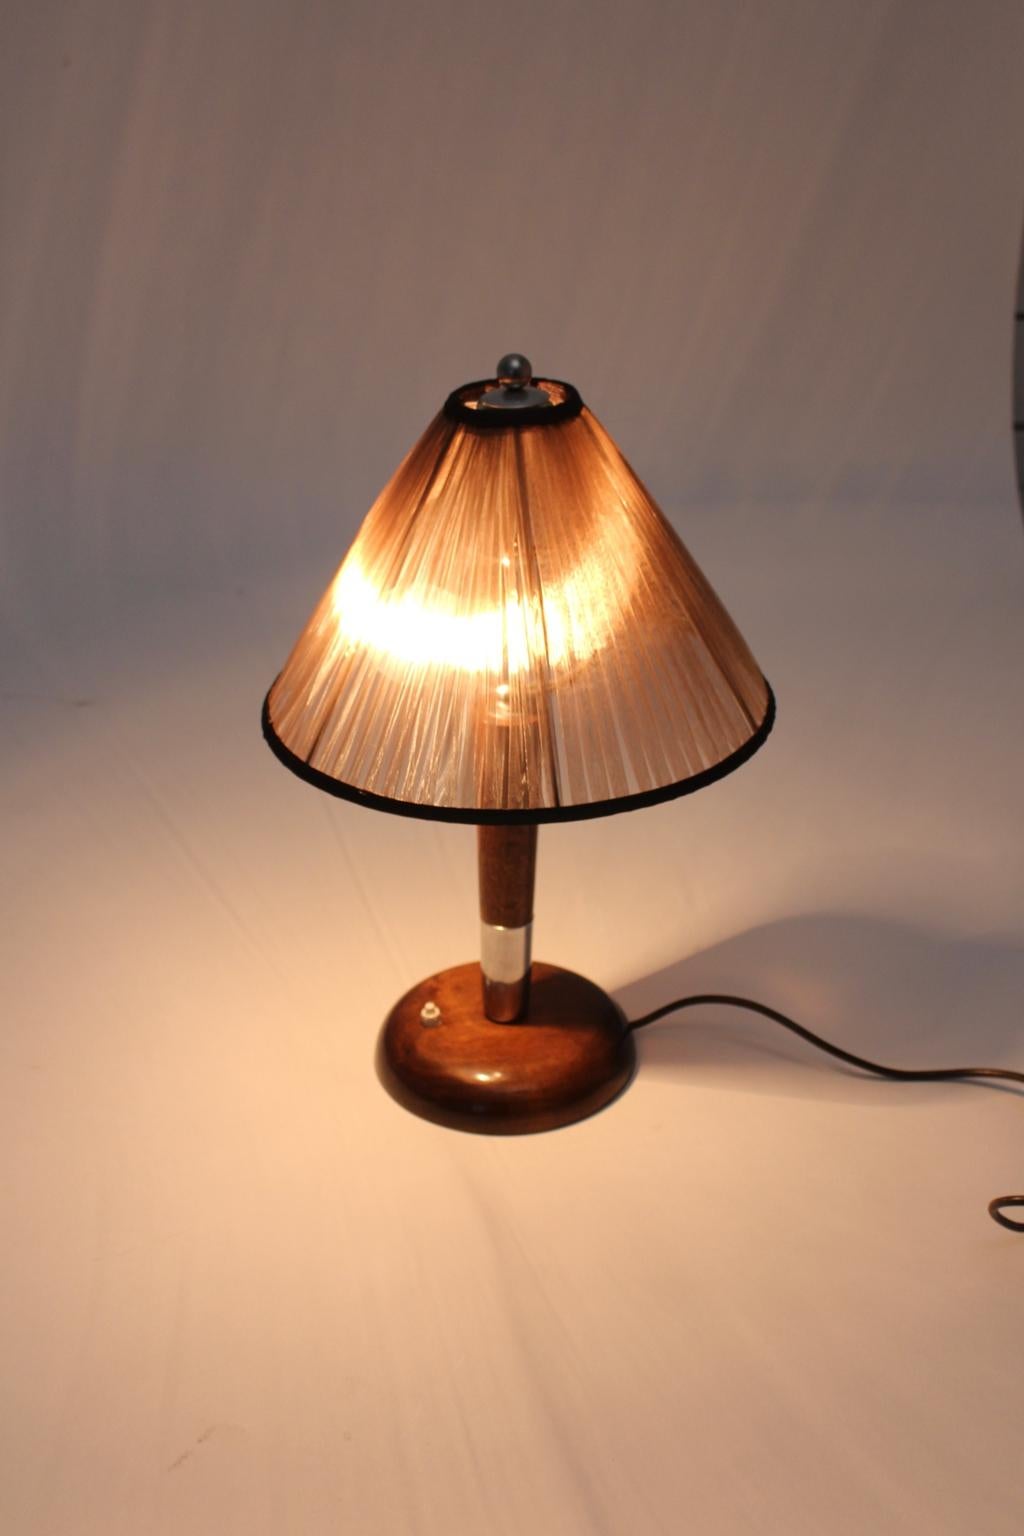 Plated Art Deco Vintage Beech Nickel Table Lamp circa 1930 Austria For Sale